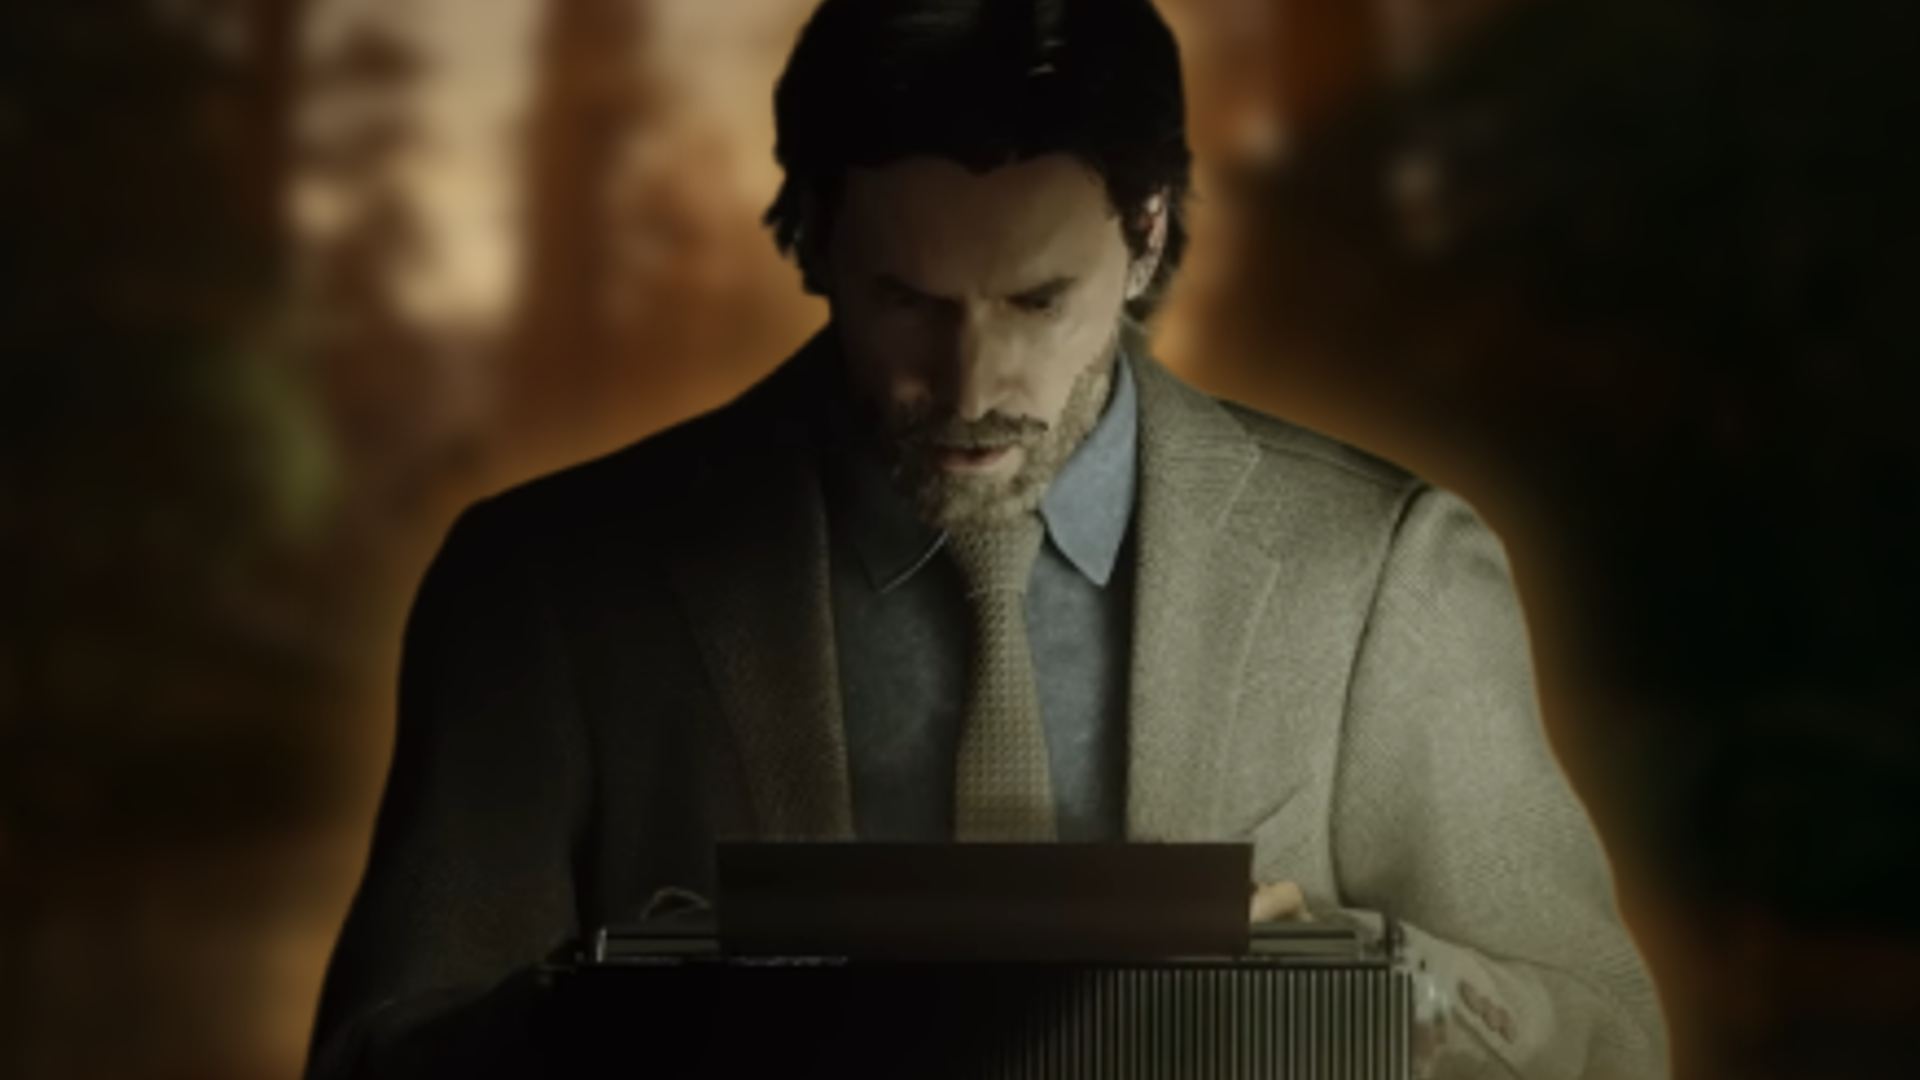 Alan Wake 2 trailer confirms it will arrive in October